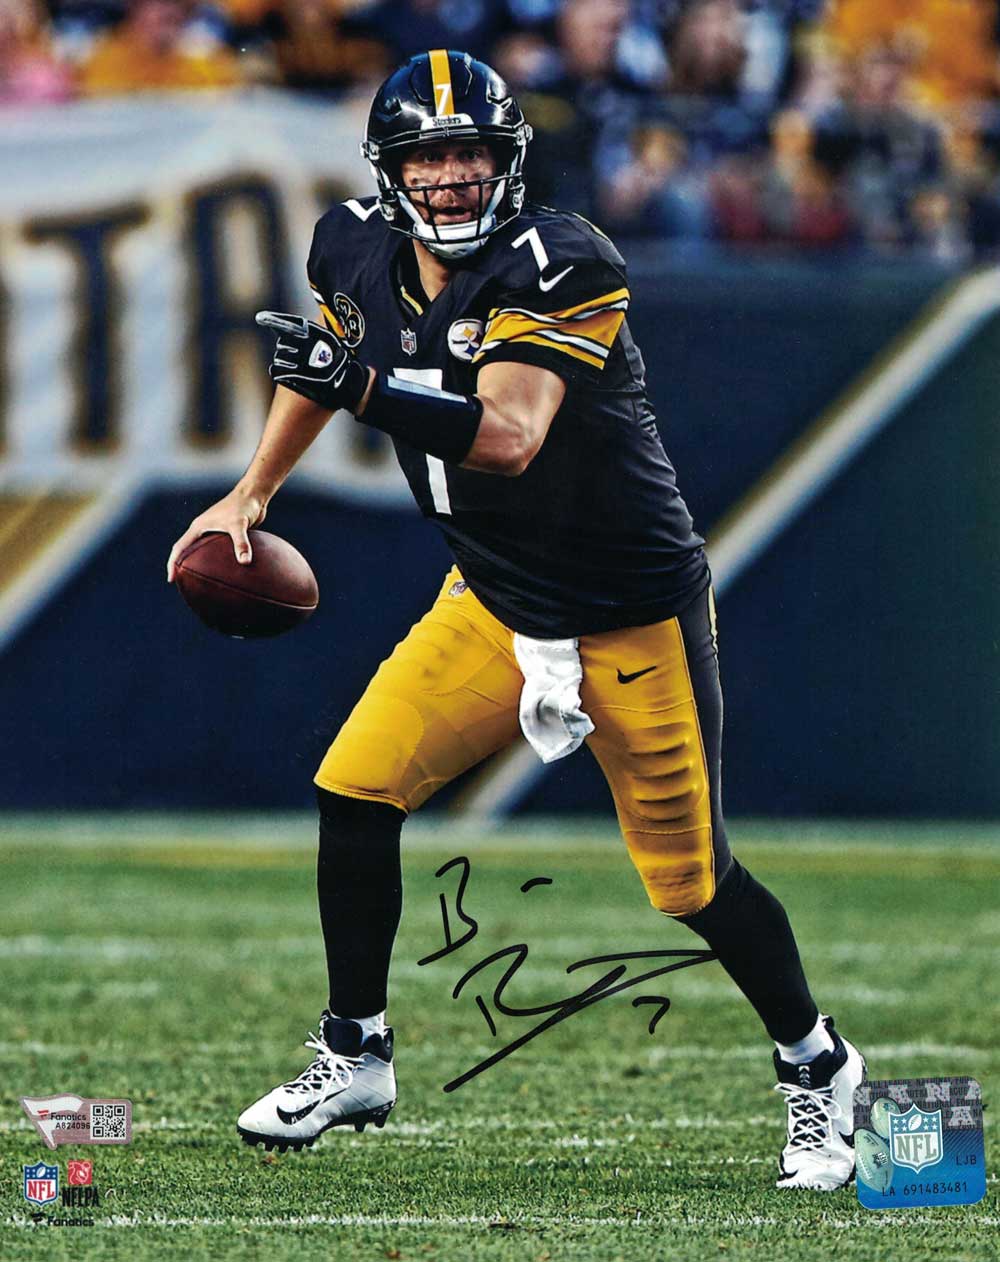 Ben Roethlisberger Autographed/Signed Pittsburgh Steelers 8x10 Photo FAN 29951